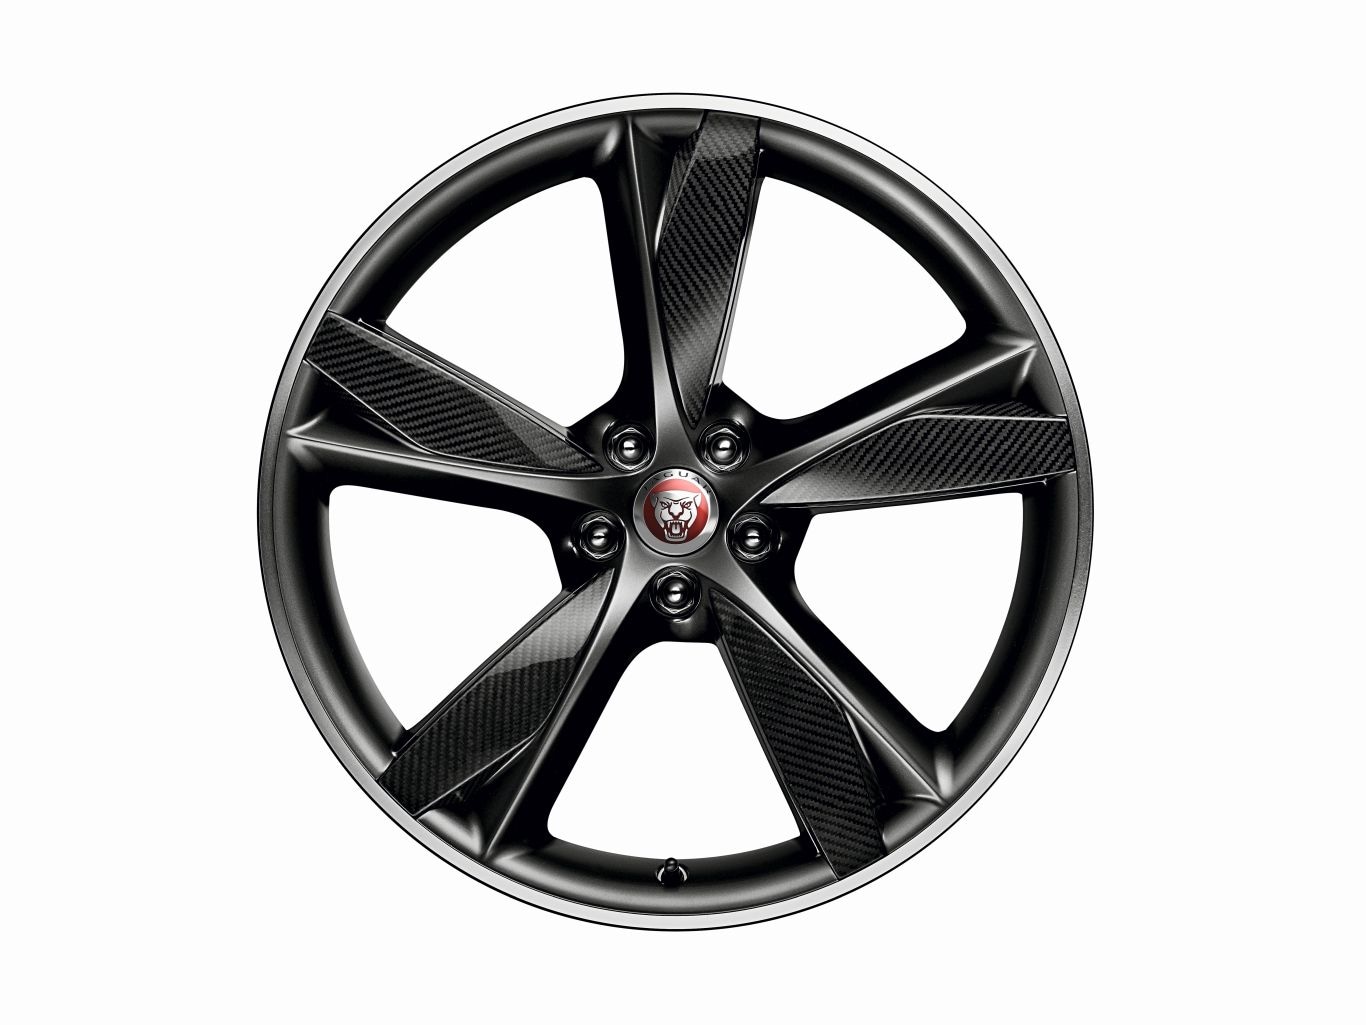 20" Forged, Style 5042, Diamond Turned with Satin Dark Grey contrast and Carbon Fiber inserts, rear image